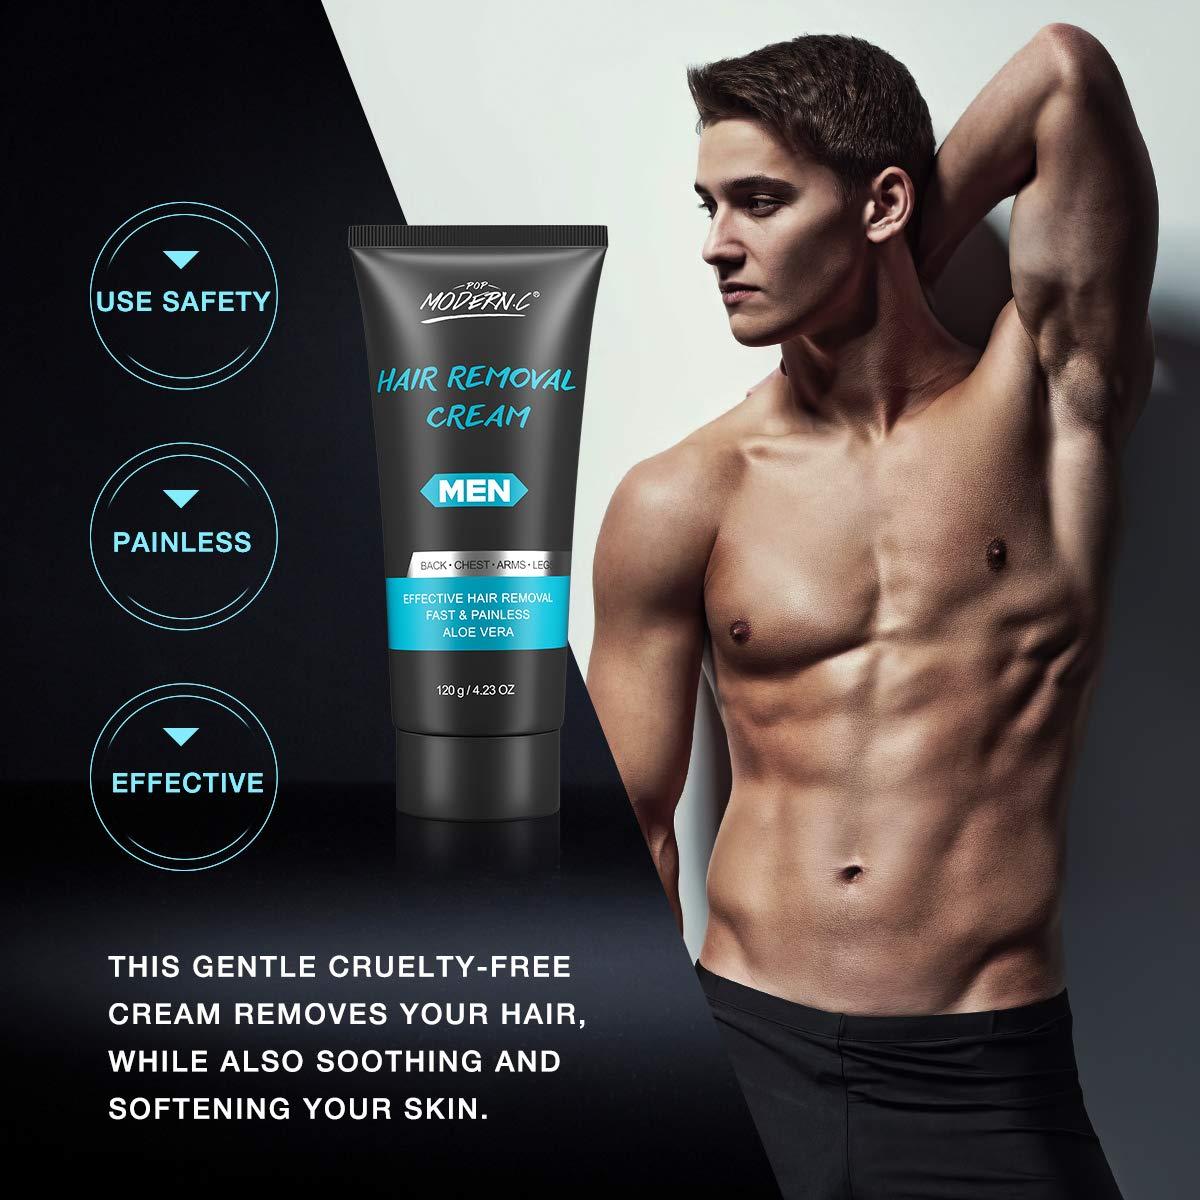 Men Hair Removal Cream Natural Painless Hair Remove Skin friendly Fast And  Effective Hair Remover Aloe Vera Depilatory Cream For Men back shoulder  chest abdomen arms armpits and legs gifts Menhair